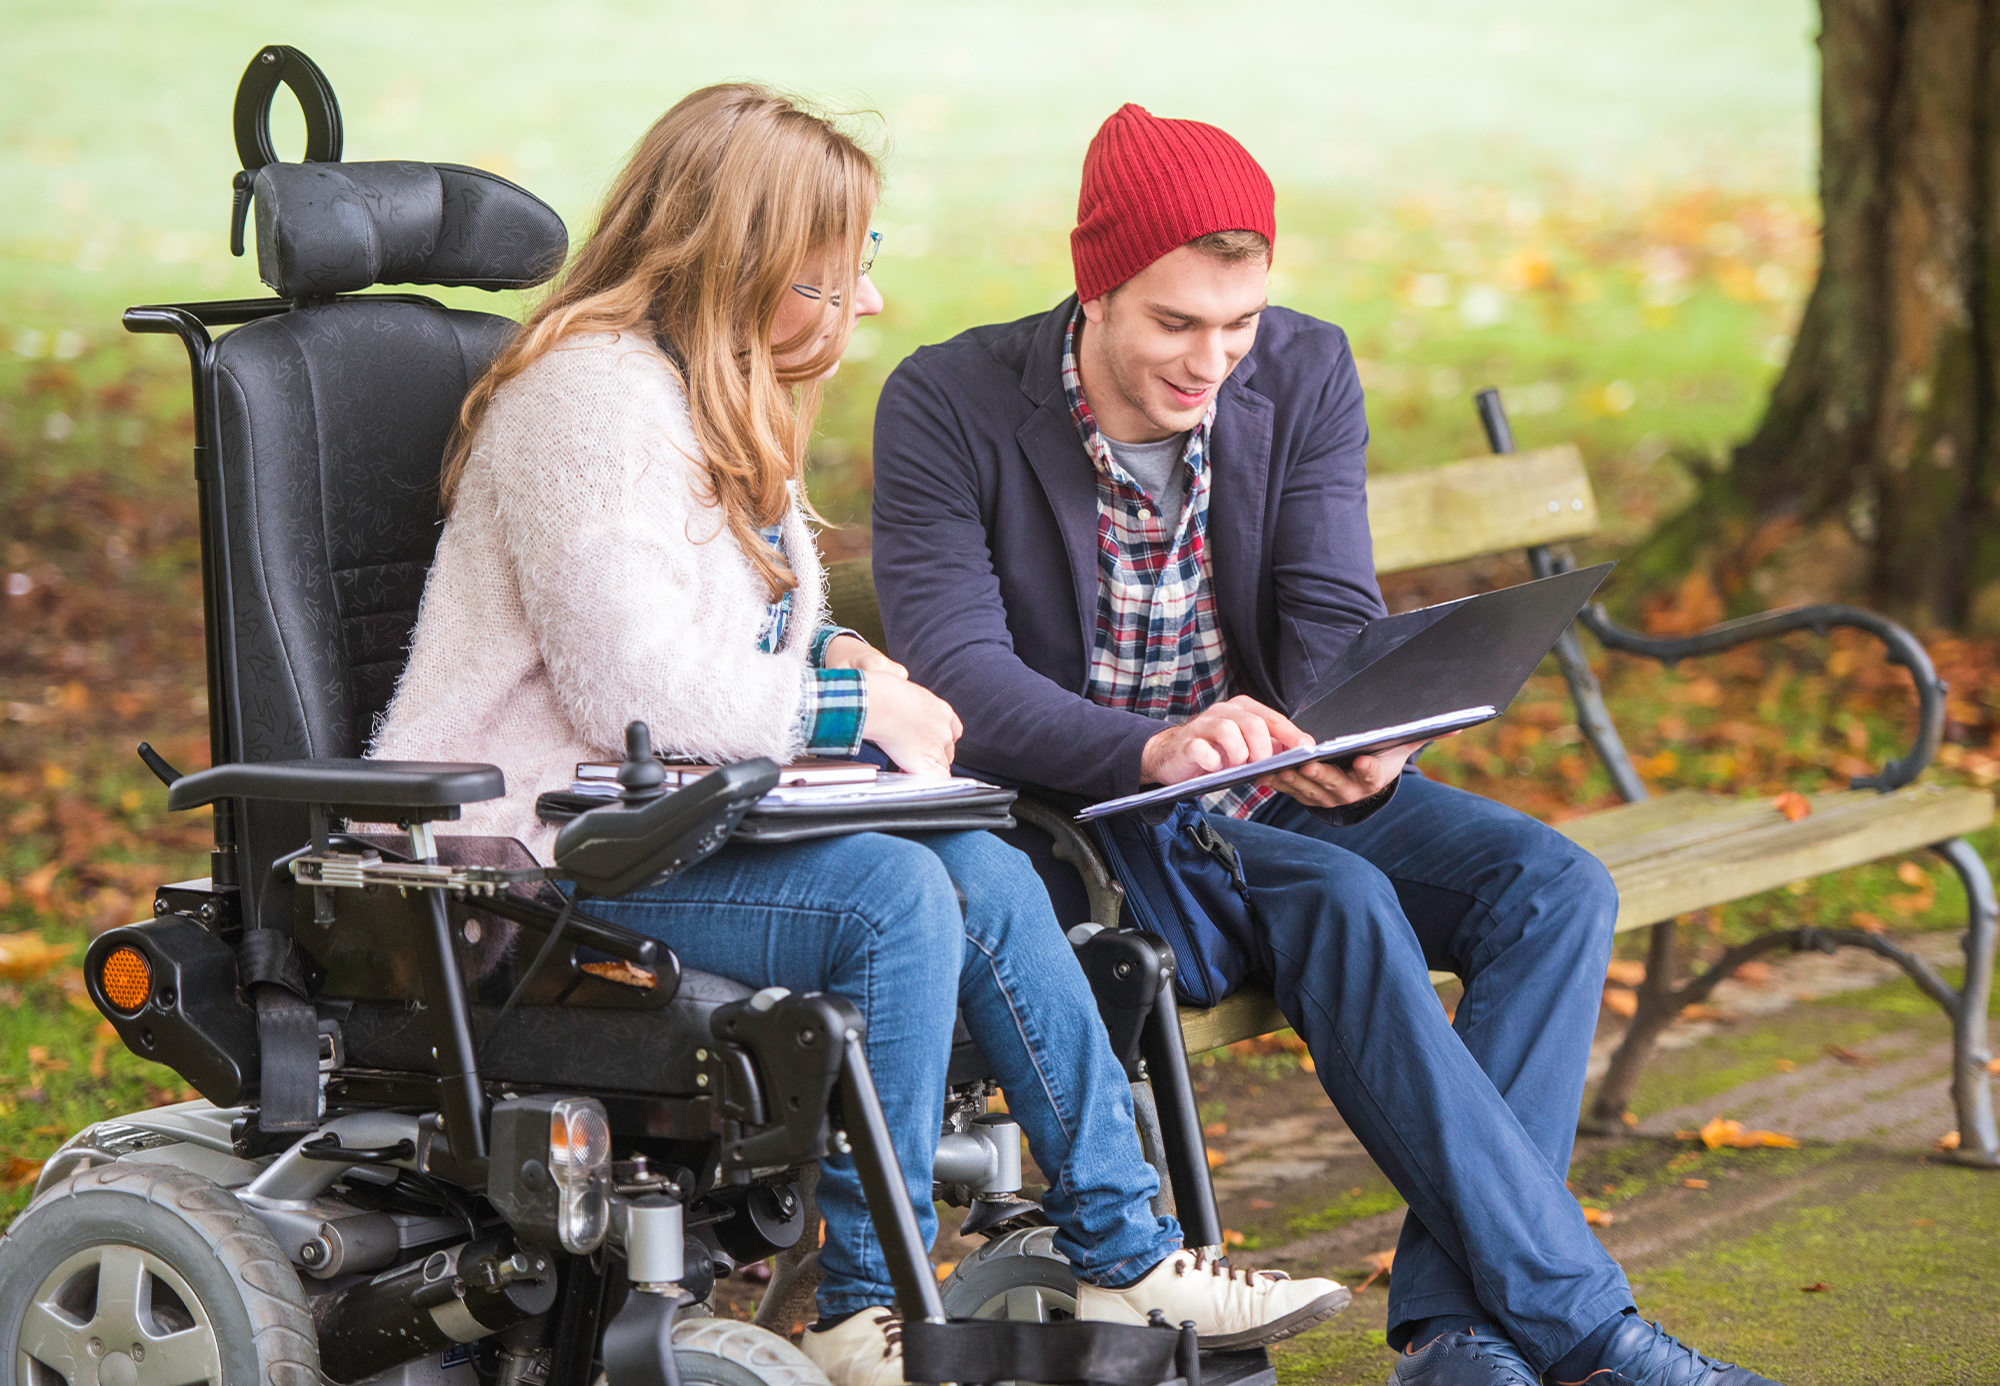 A disabled woman in a wheelchair beside her male carer looking at a filing, within a park